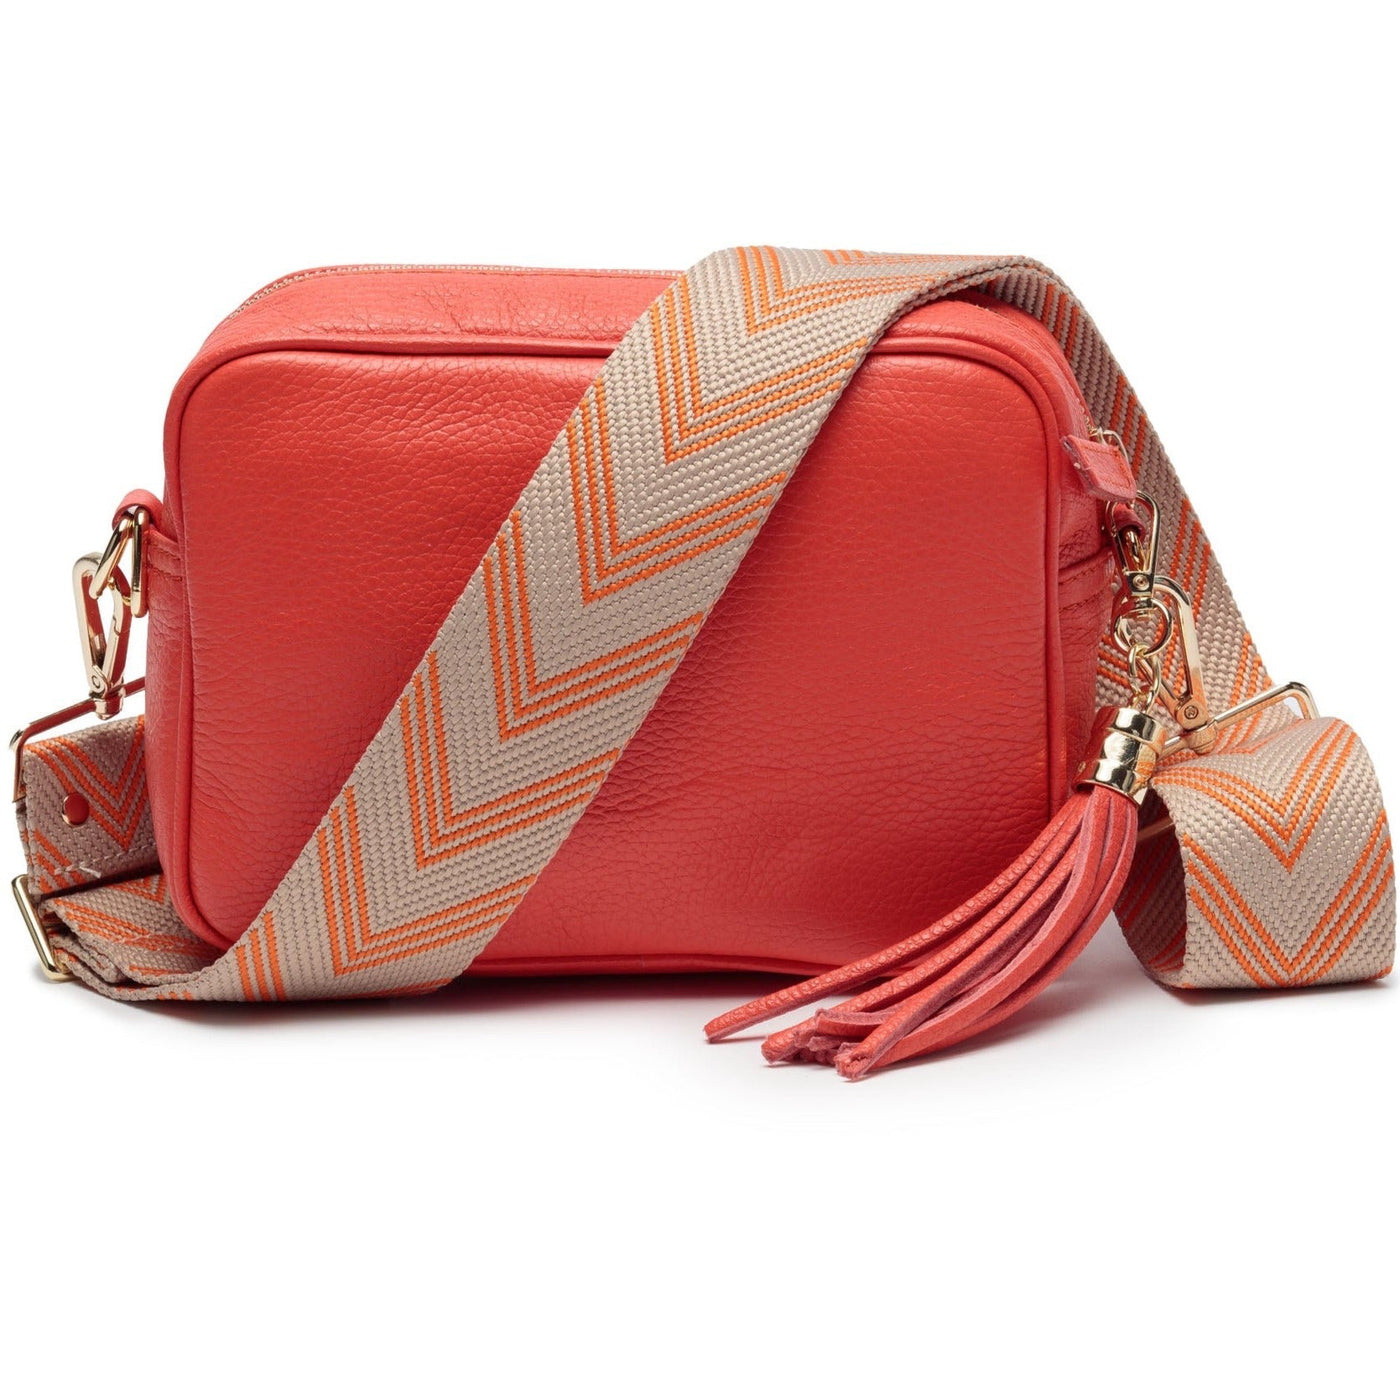 Elie Beaumont Designer Leather Crossbody Bag - Coral (GOLD Fittings)